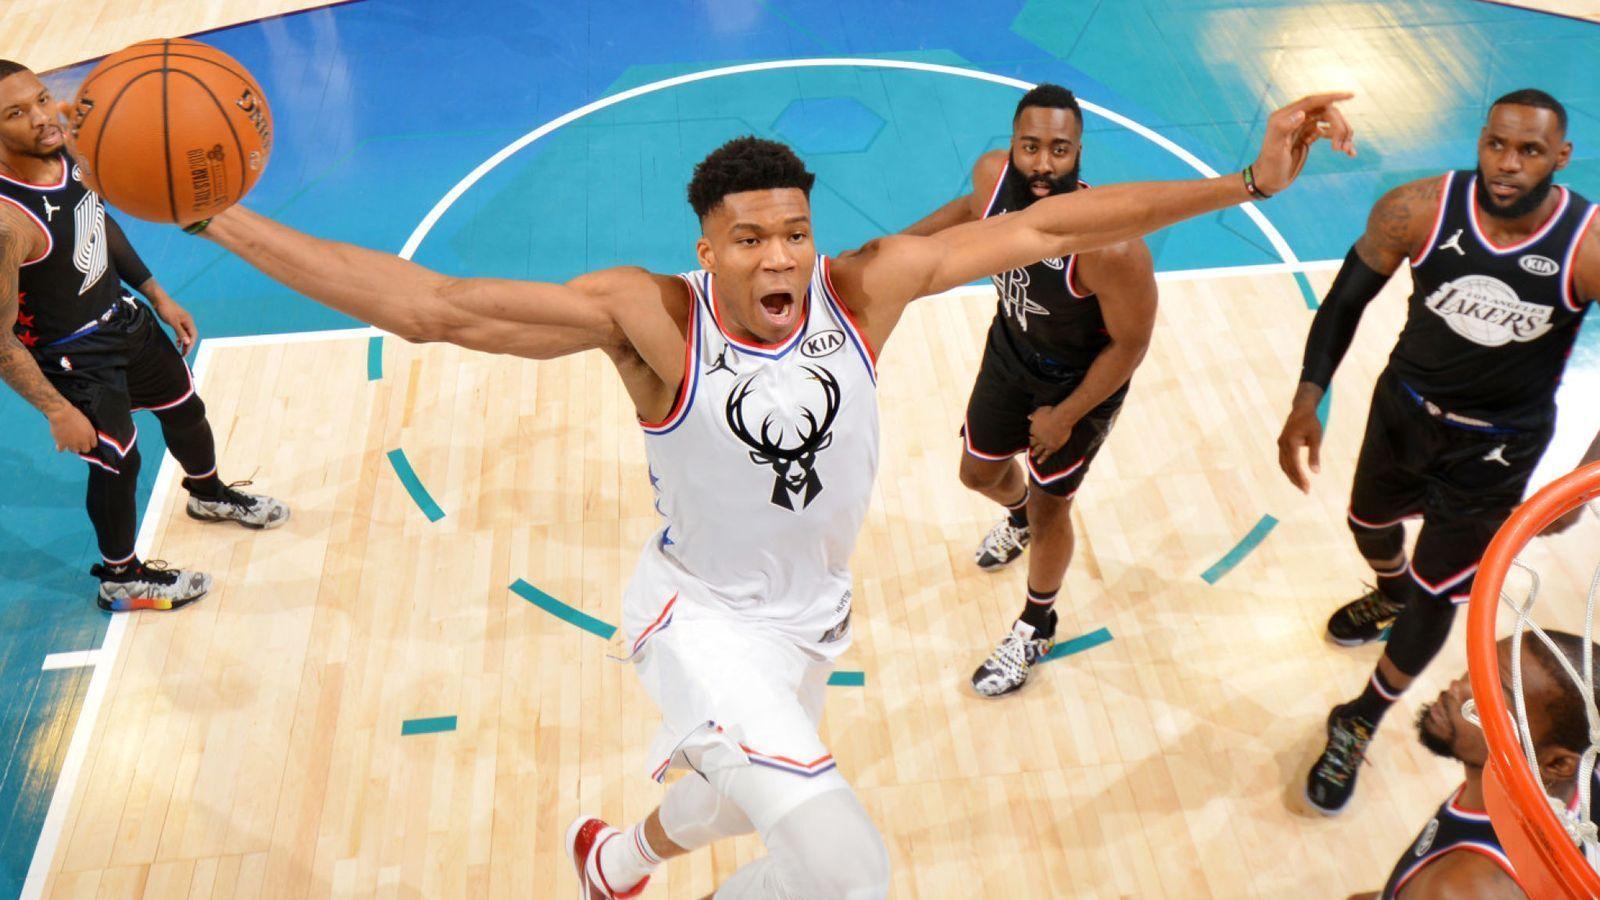 All Star 2019: Giannis Antetokounmpo Top Scores In All Star Game